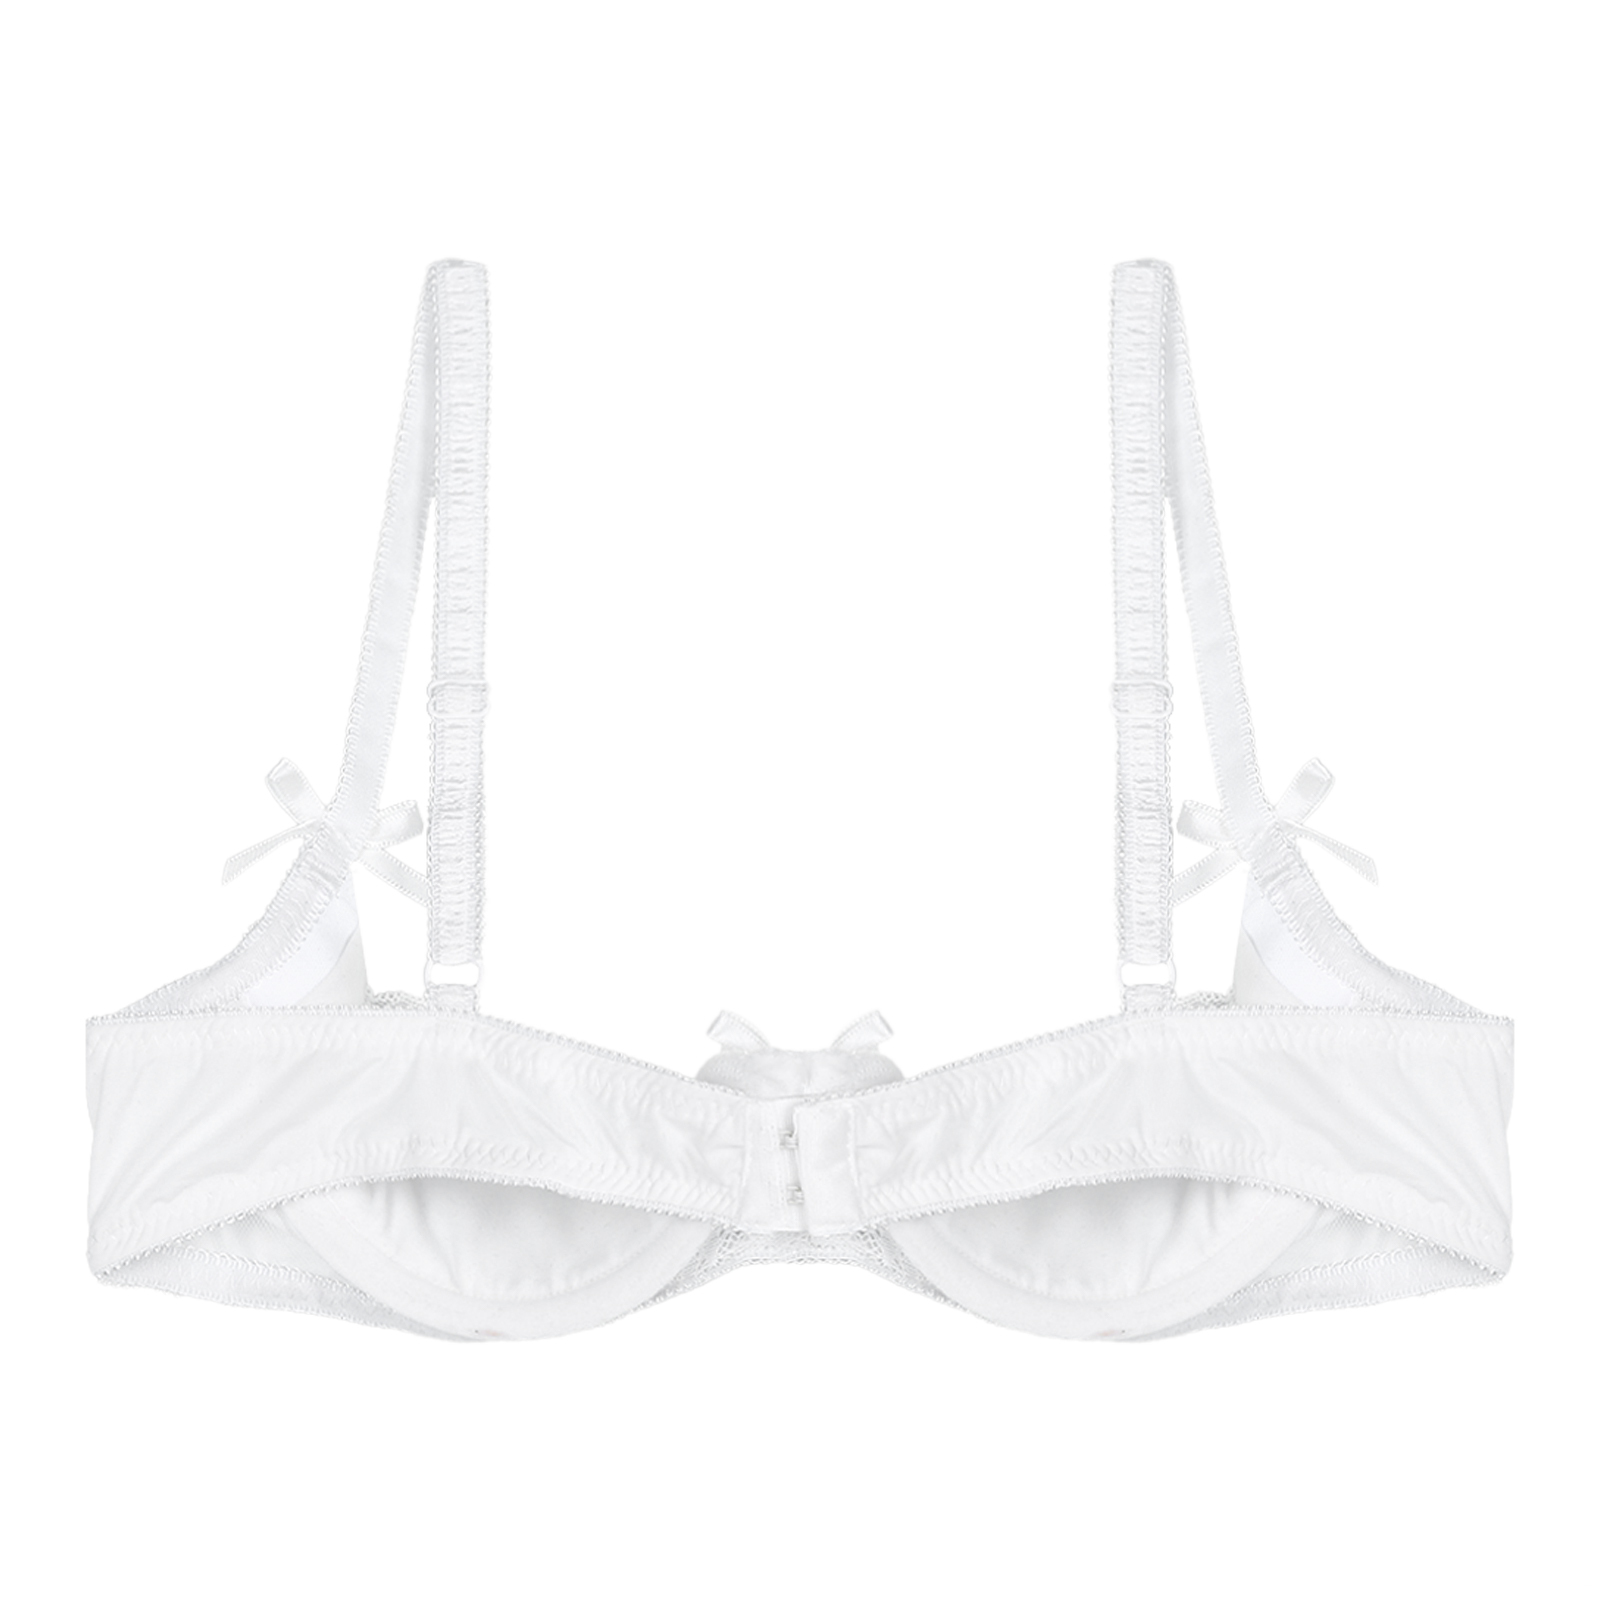 DPOIS Women's 1/2 Cup Lace Bra Balconette Push Up Underwired Demi Shelf ...